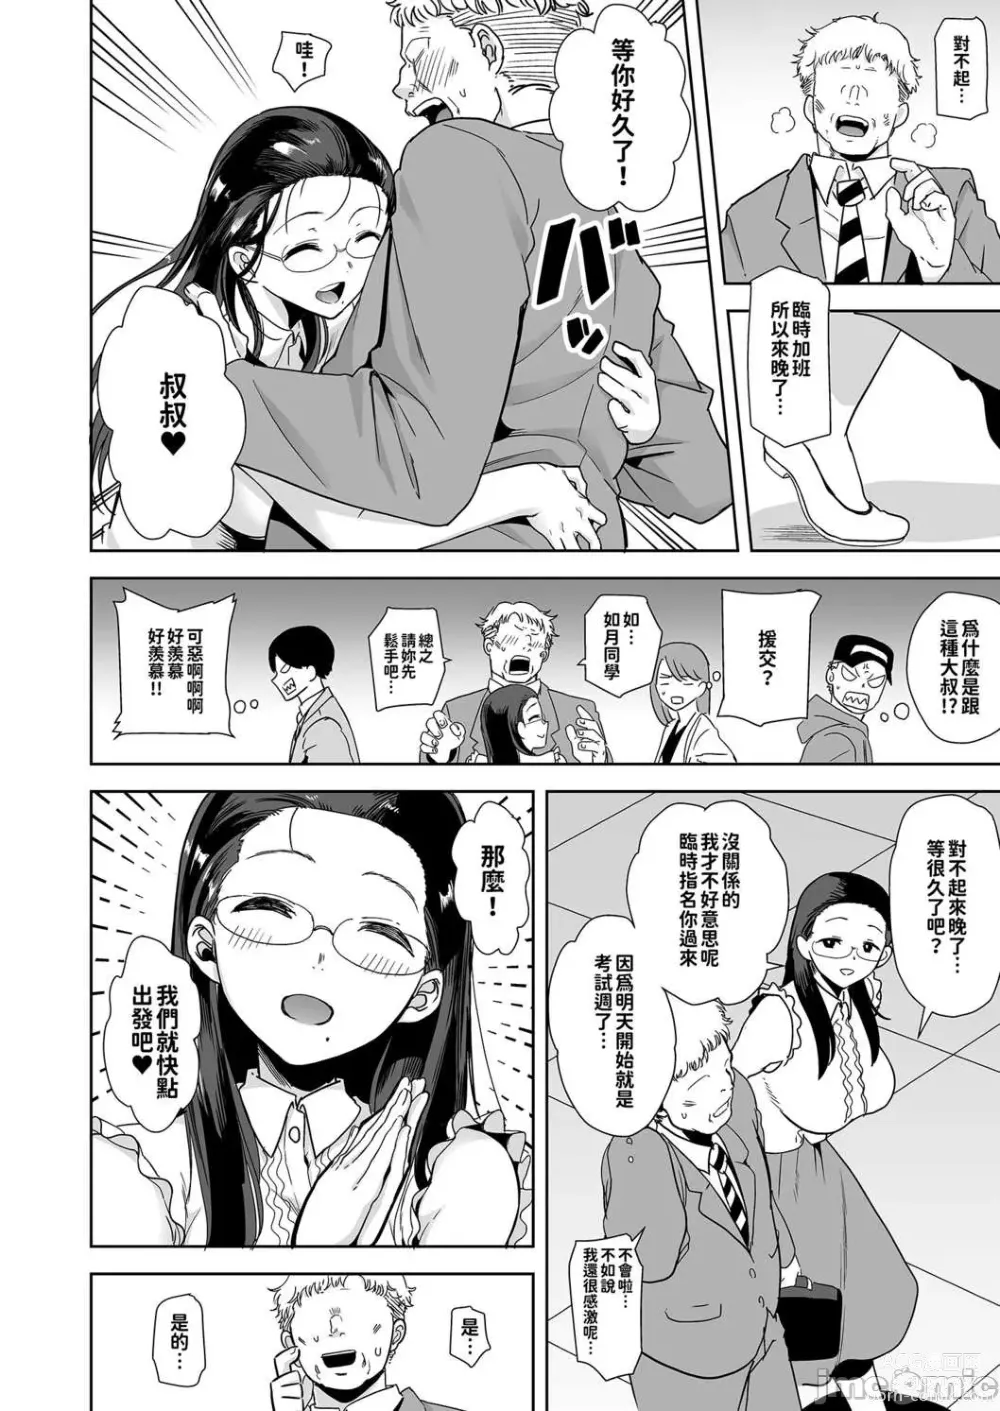 Page 4 of doujinshi 聖華女学院高等部公認竿おじさん 1